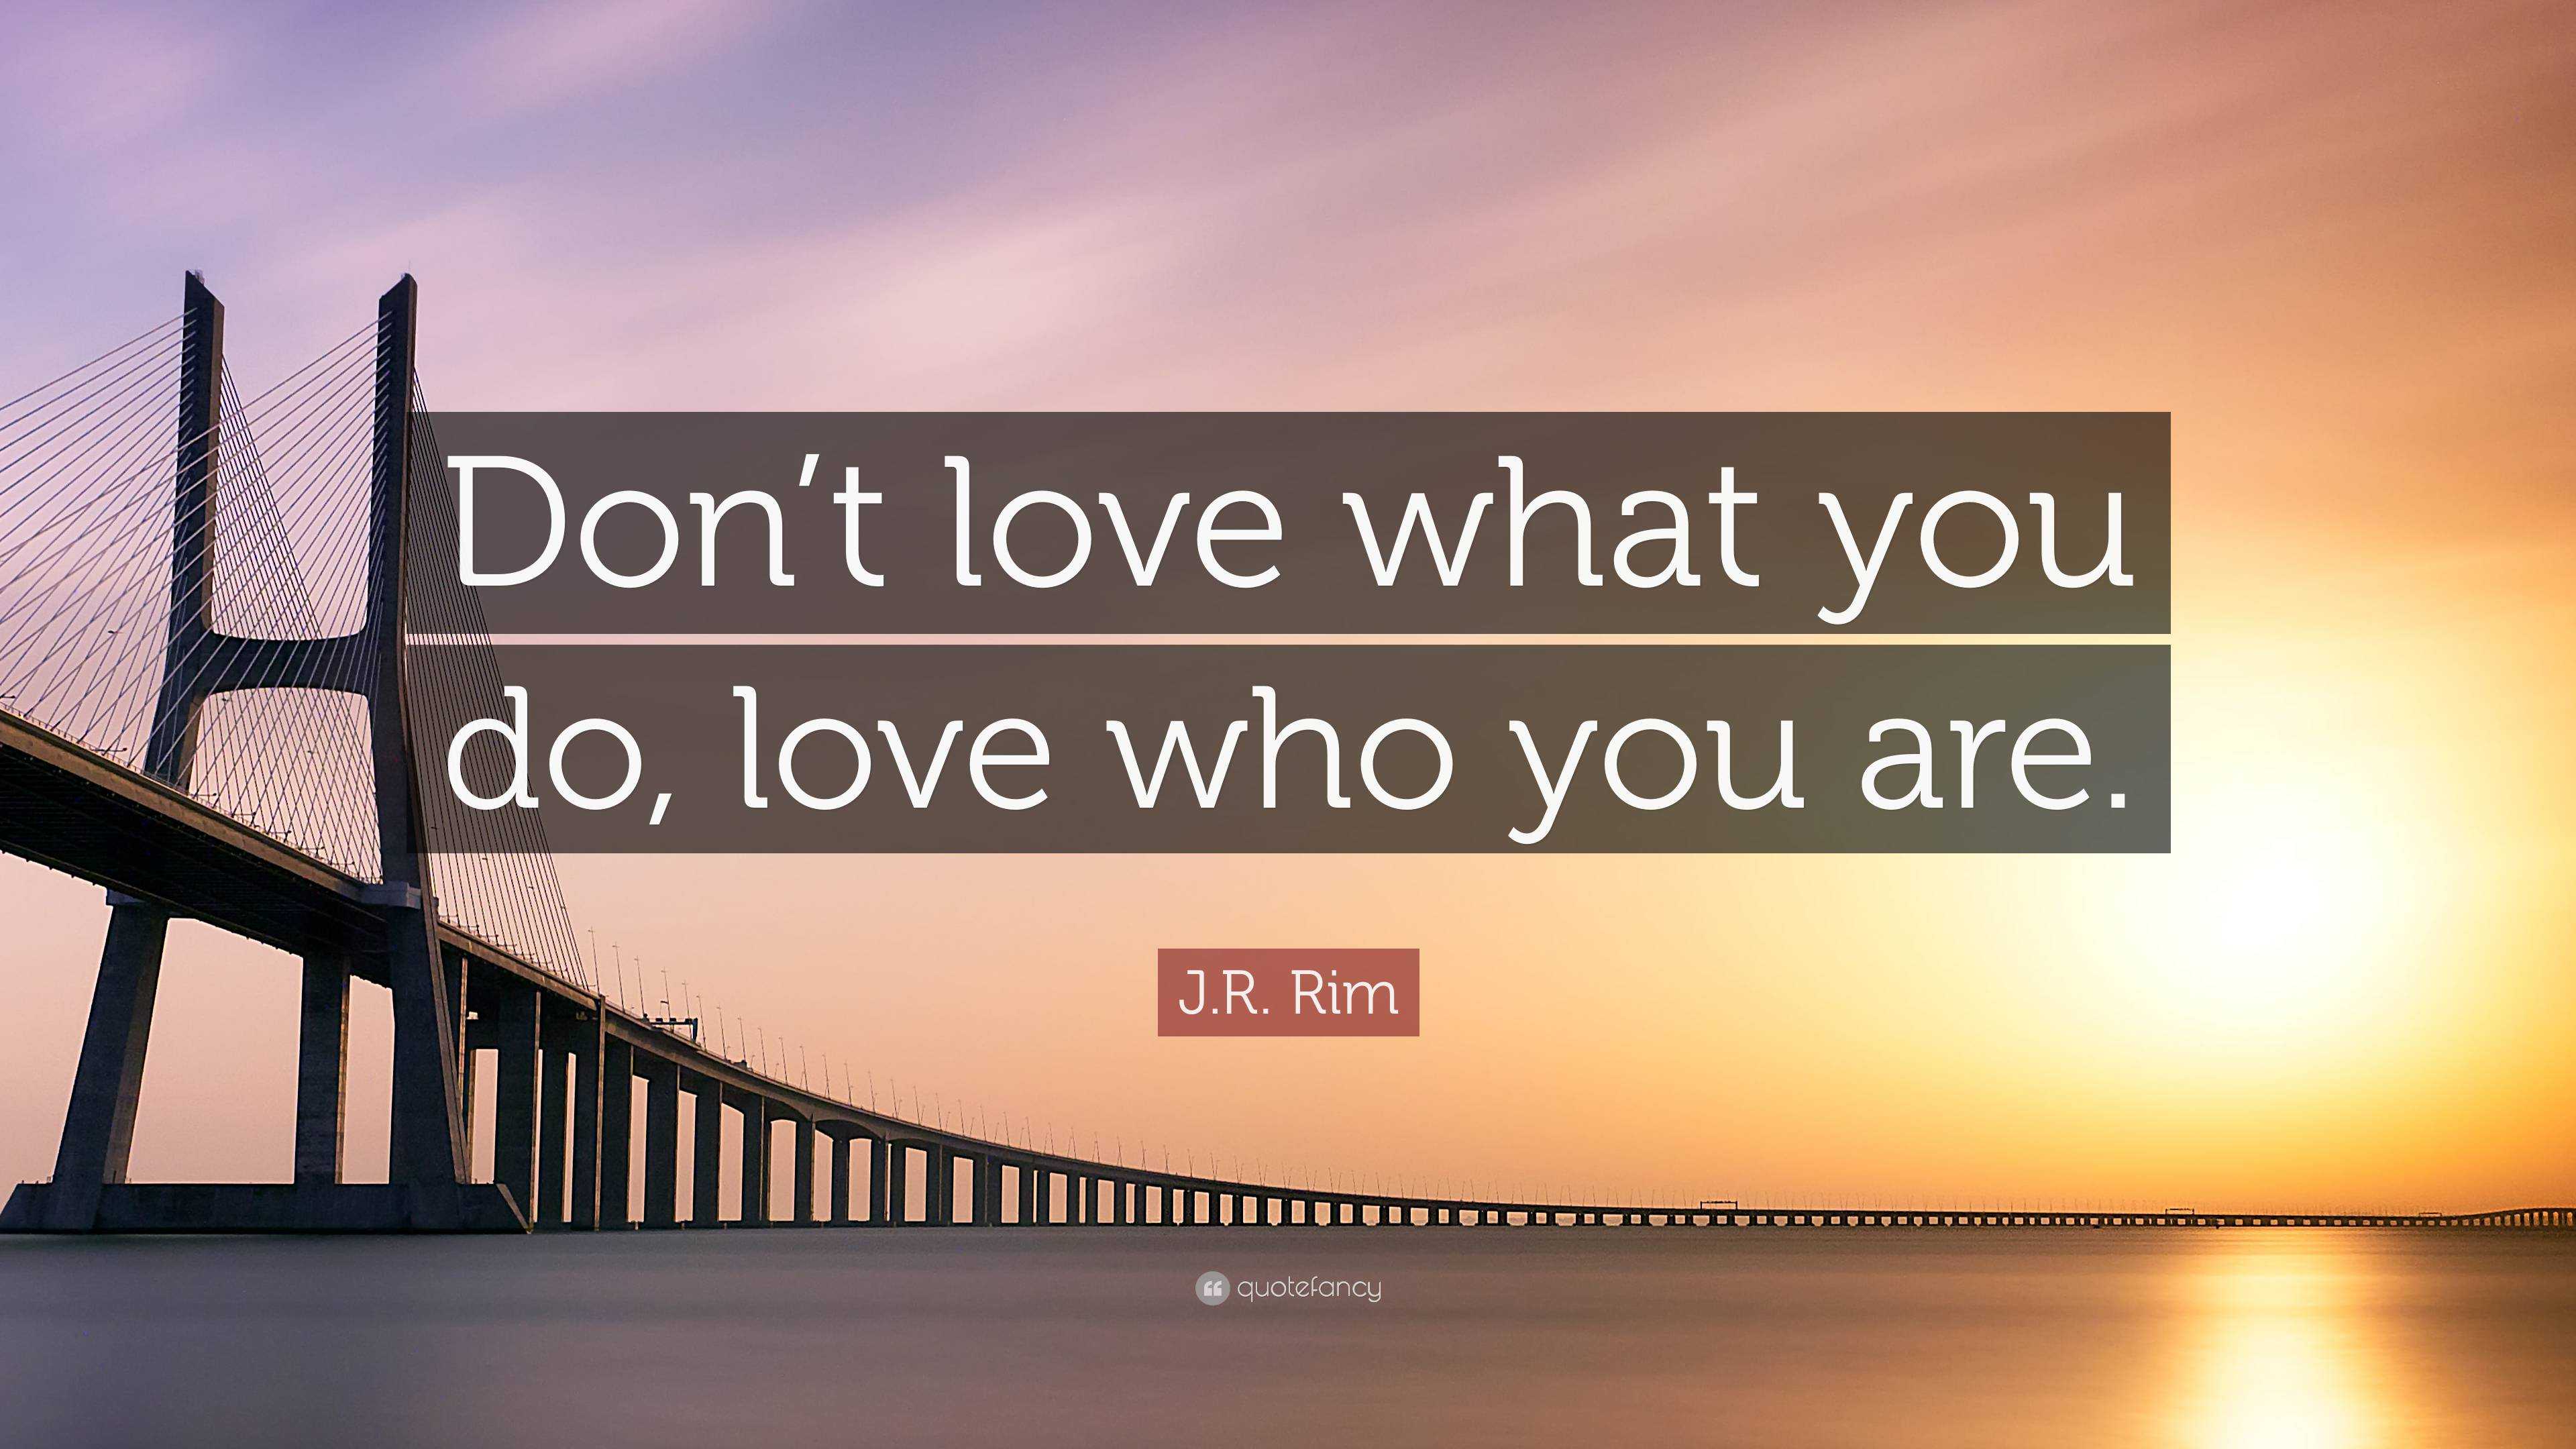 . Rim Quote: “Don't love what you do, love who you are.”